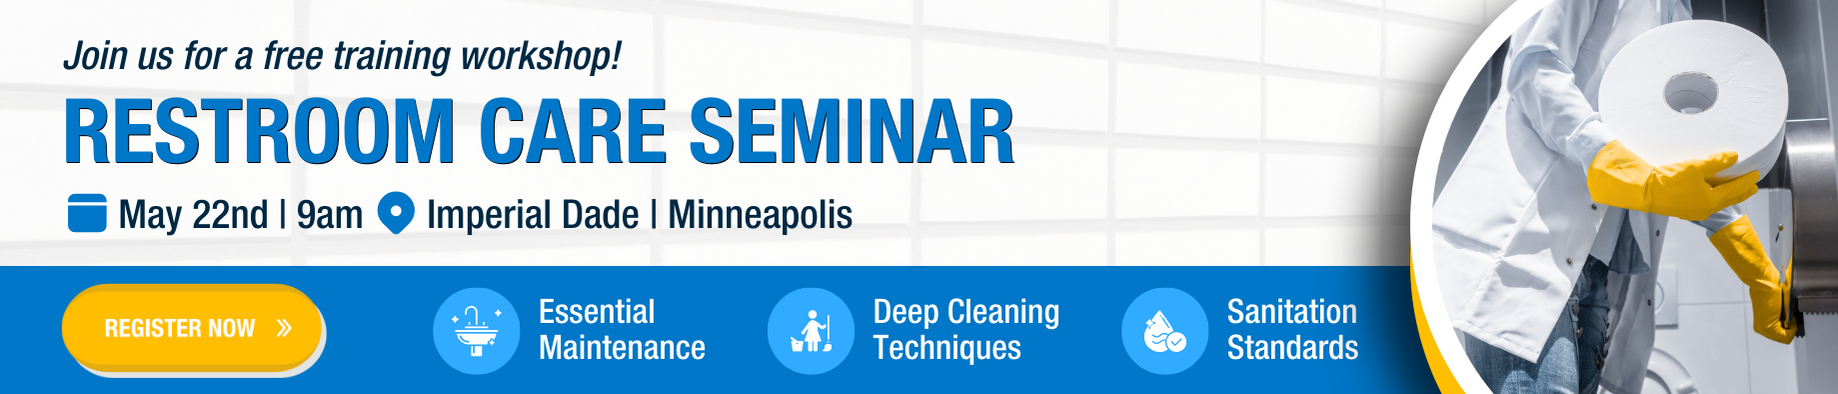 oin us at Imperial Dade in Minneapolis on May 22nd for a Restroom Care Seminar. Learn essential maintenance, deep cleaning techniques, and compliance with sanitation standards through live demos and expert-led sessions. Perfect for facility managers, maintenance teams, and business owners aiming to enhance restroom cleanliness and safety.